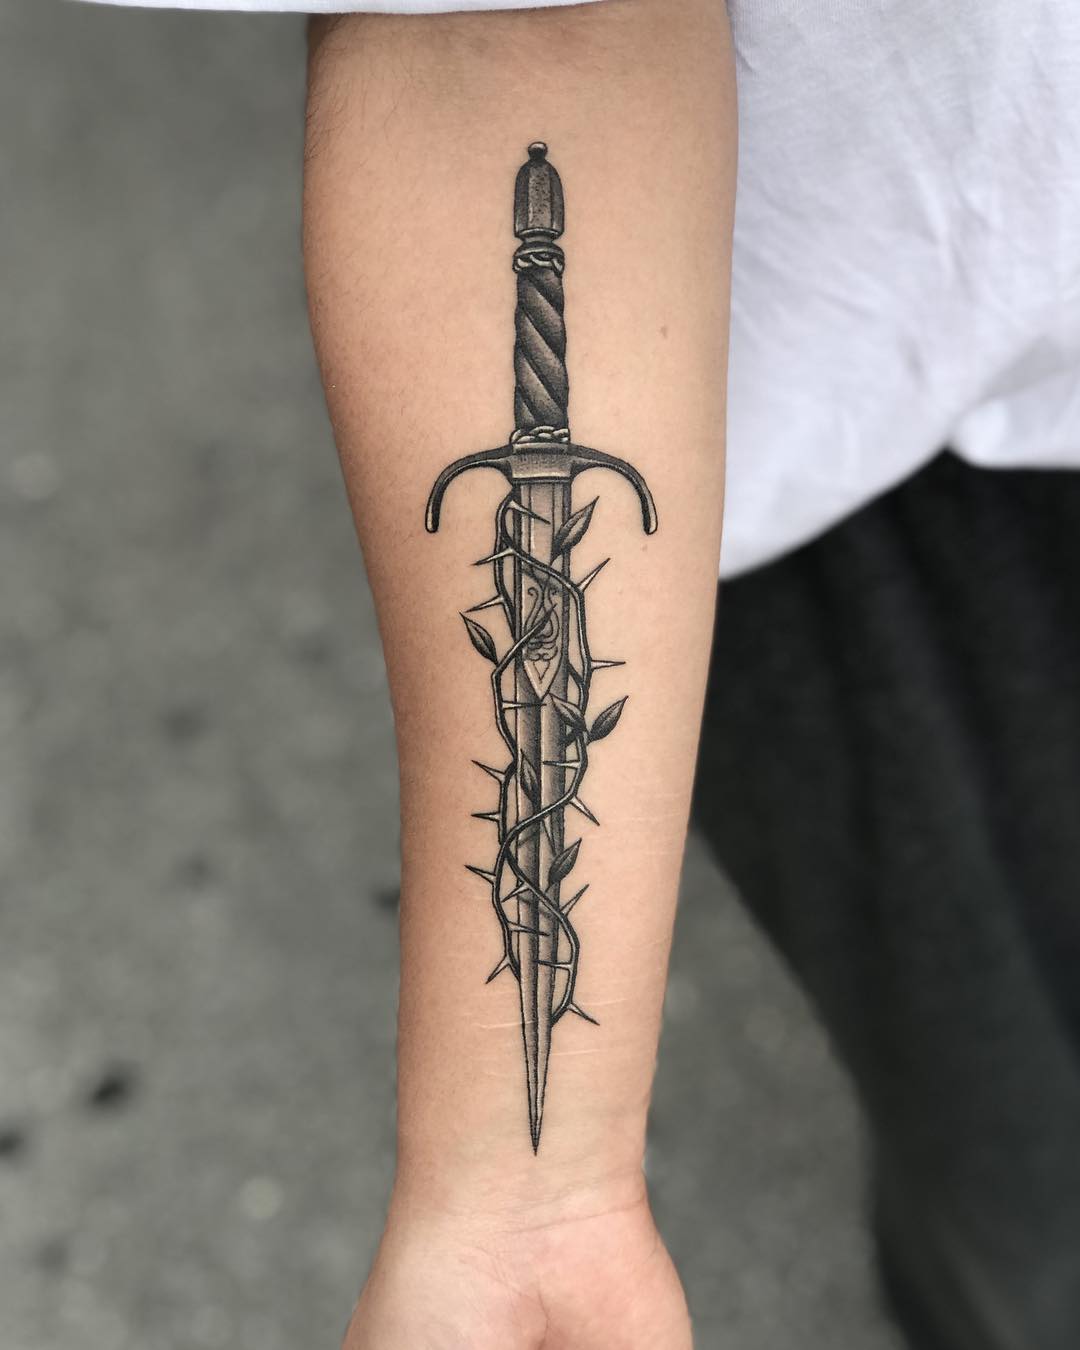 Dagger and thorns tattoo by Javier Betancourt